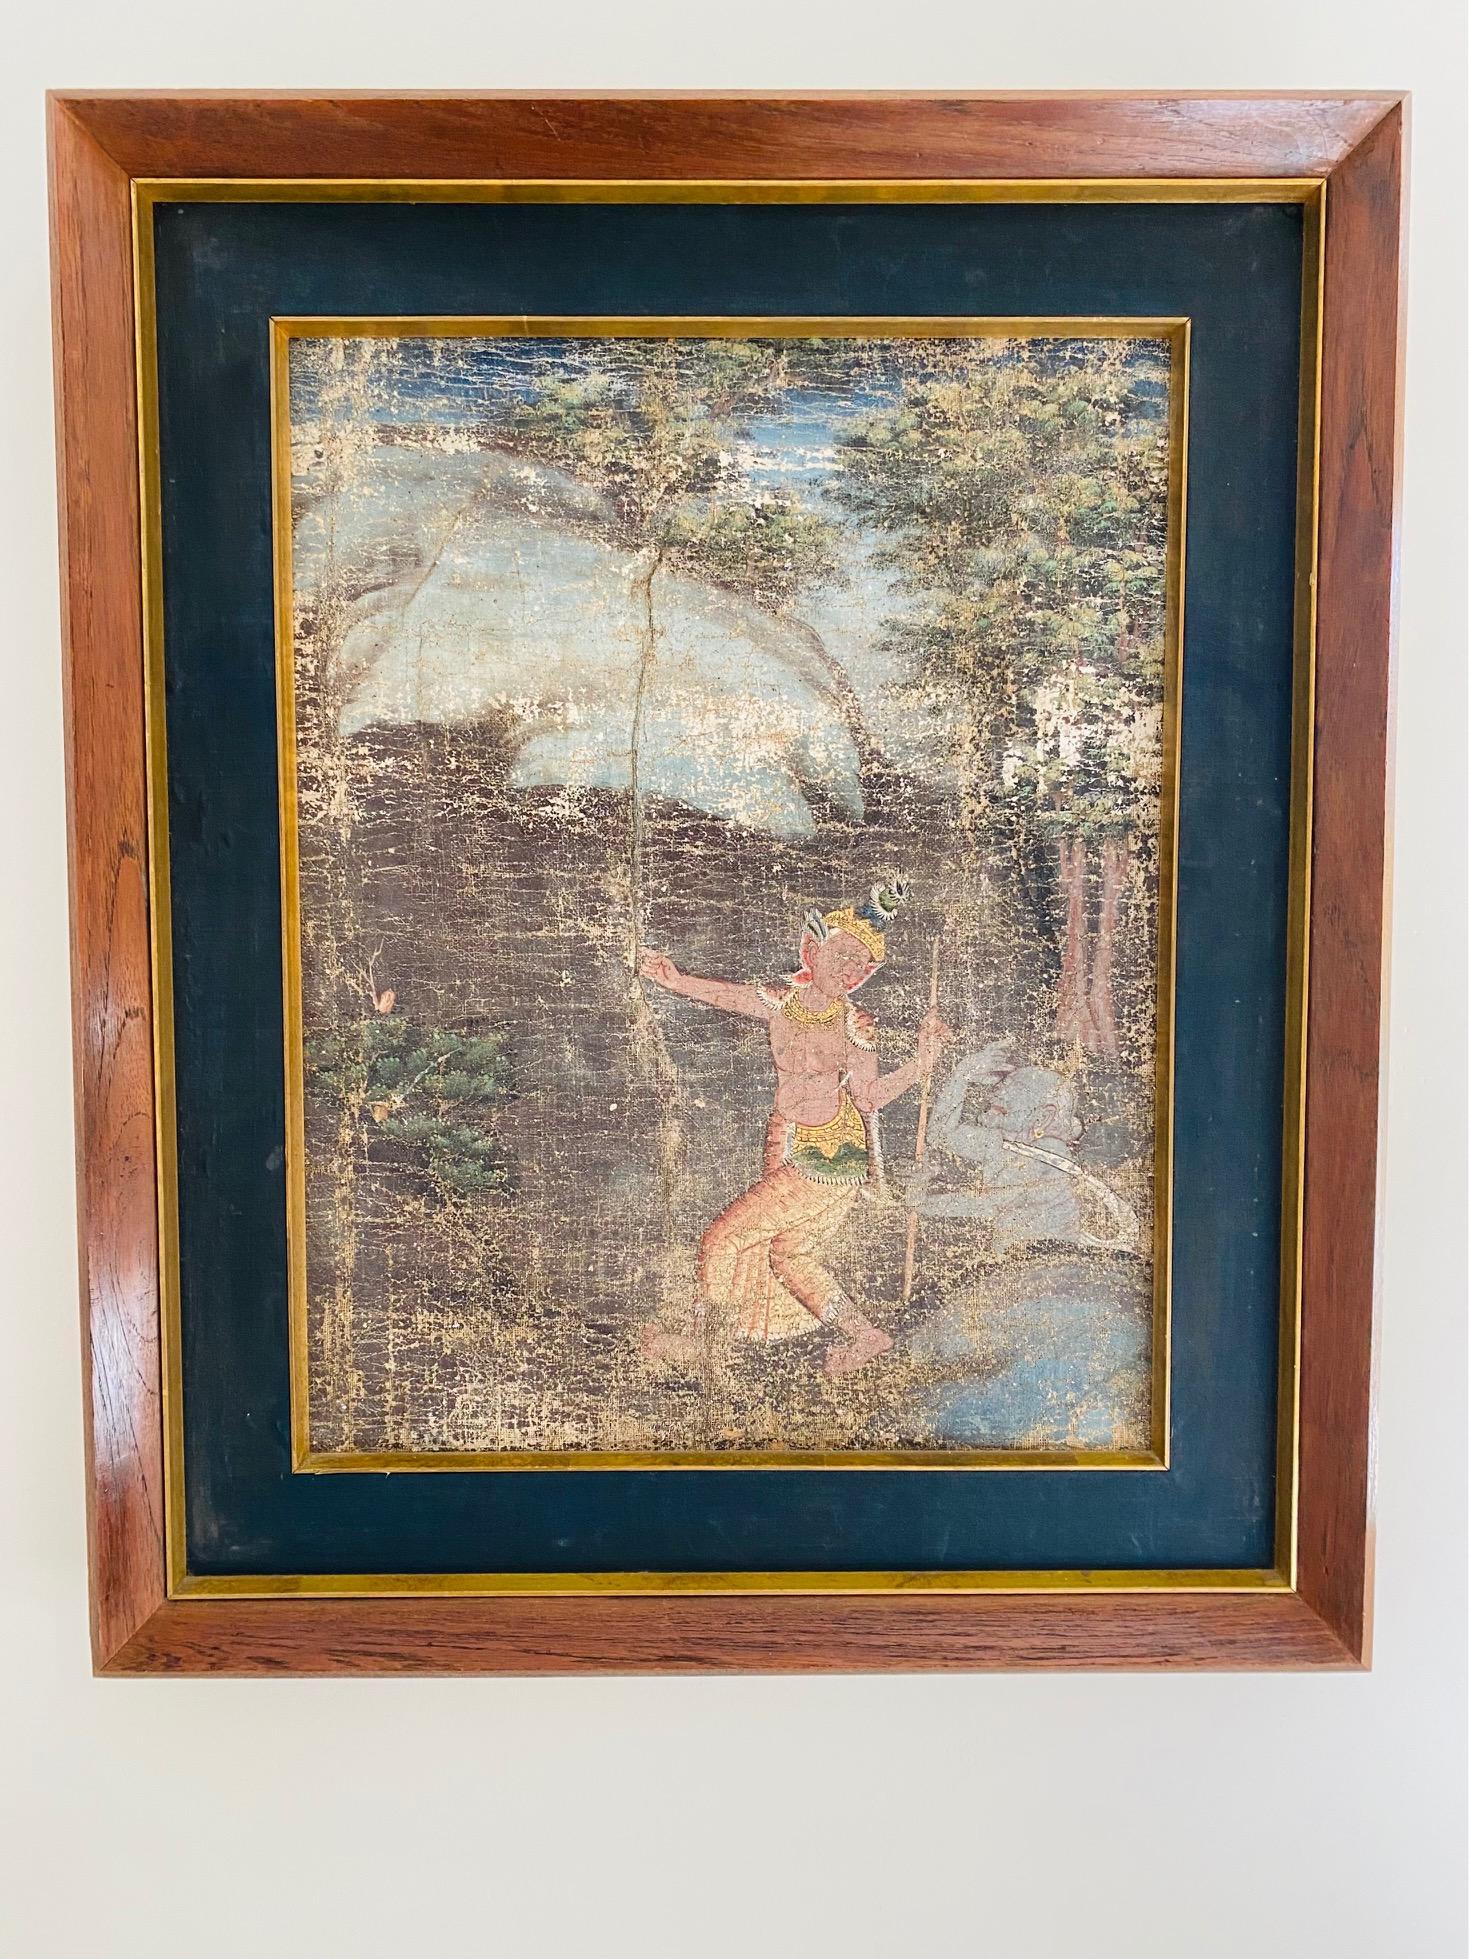 Antique Thai painting depicting an Aspara or dancing nymph in the forest with perhaps Hanuman, The Monkey God, recognized in both Hindu and Buddhist religions for his strength and extraordinary feats. Oil on board painting may date back to the late